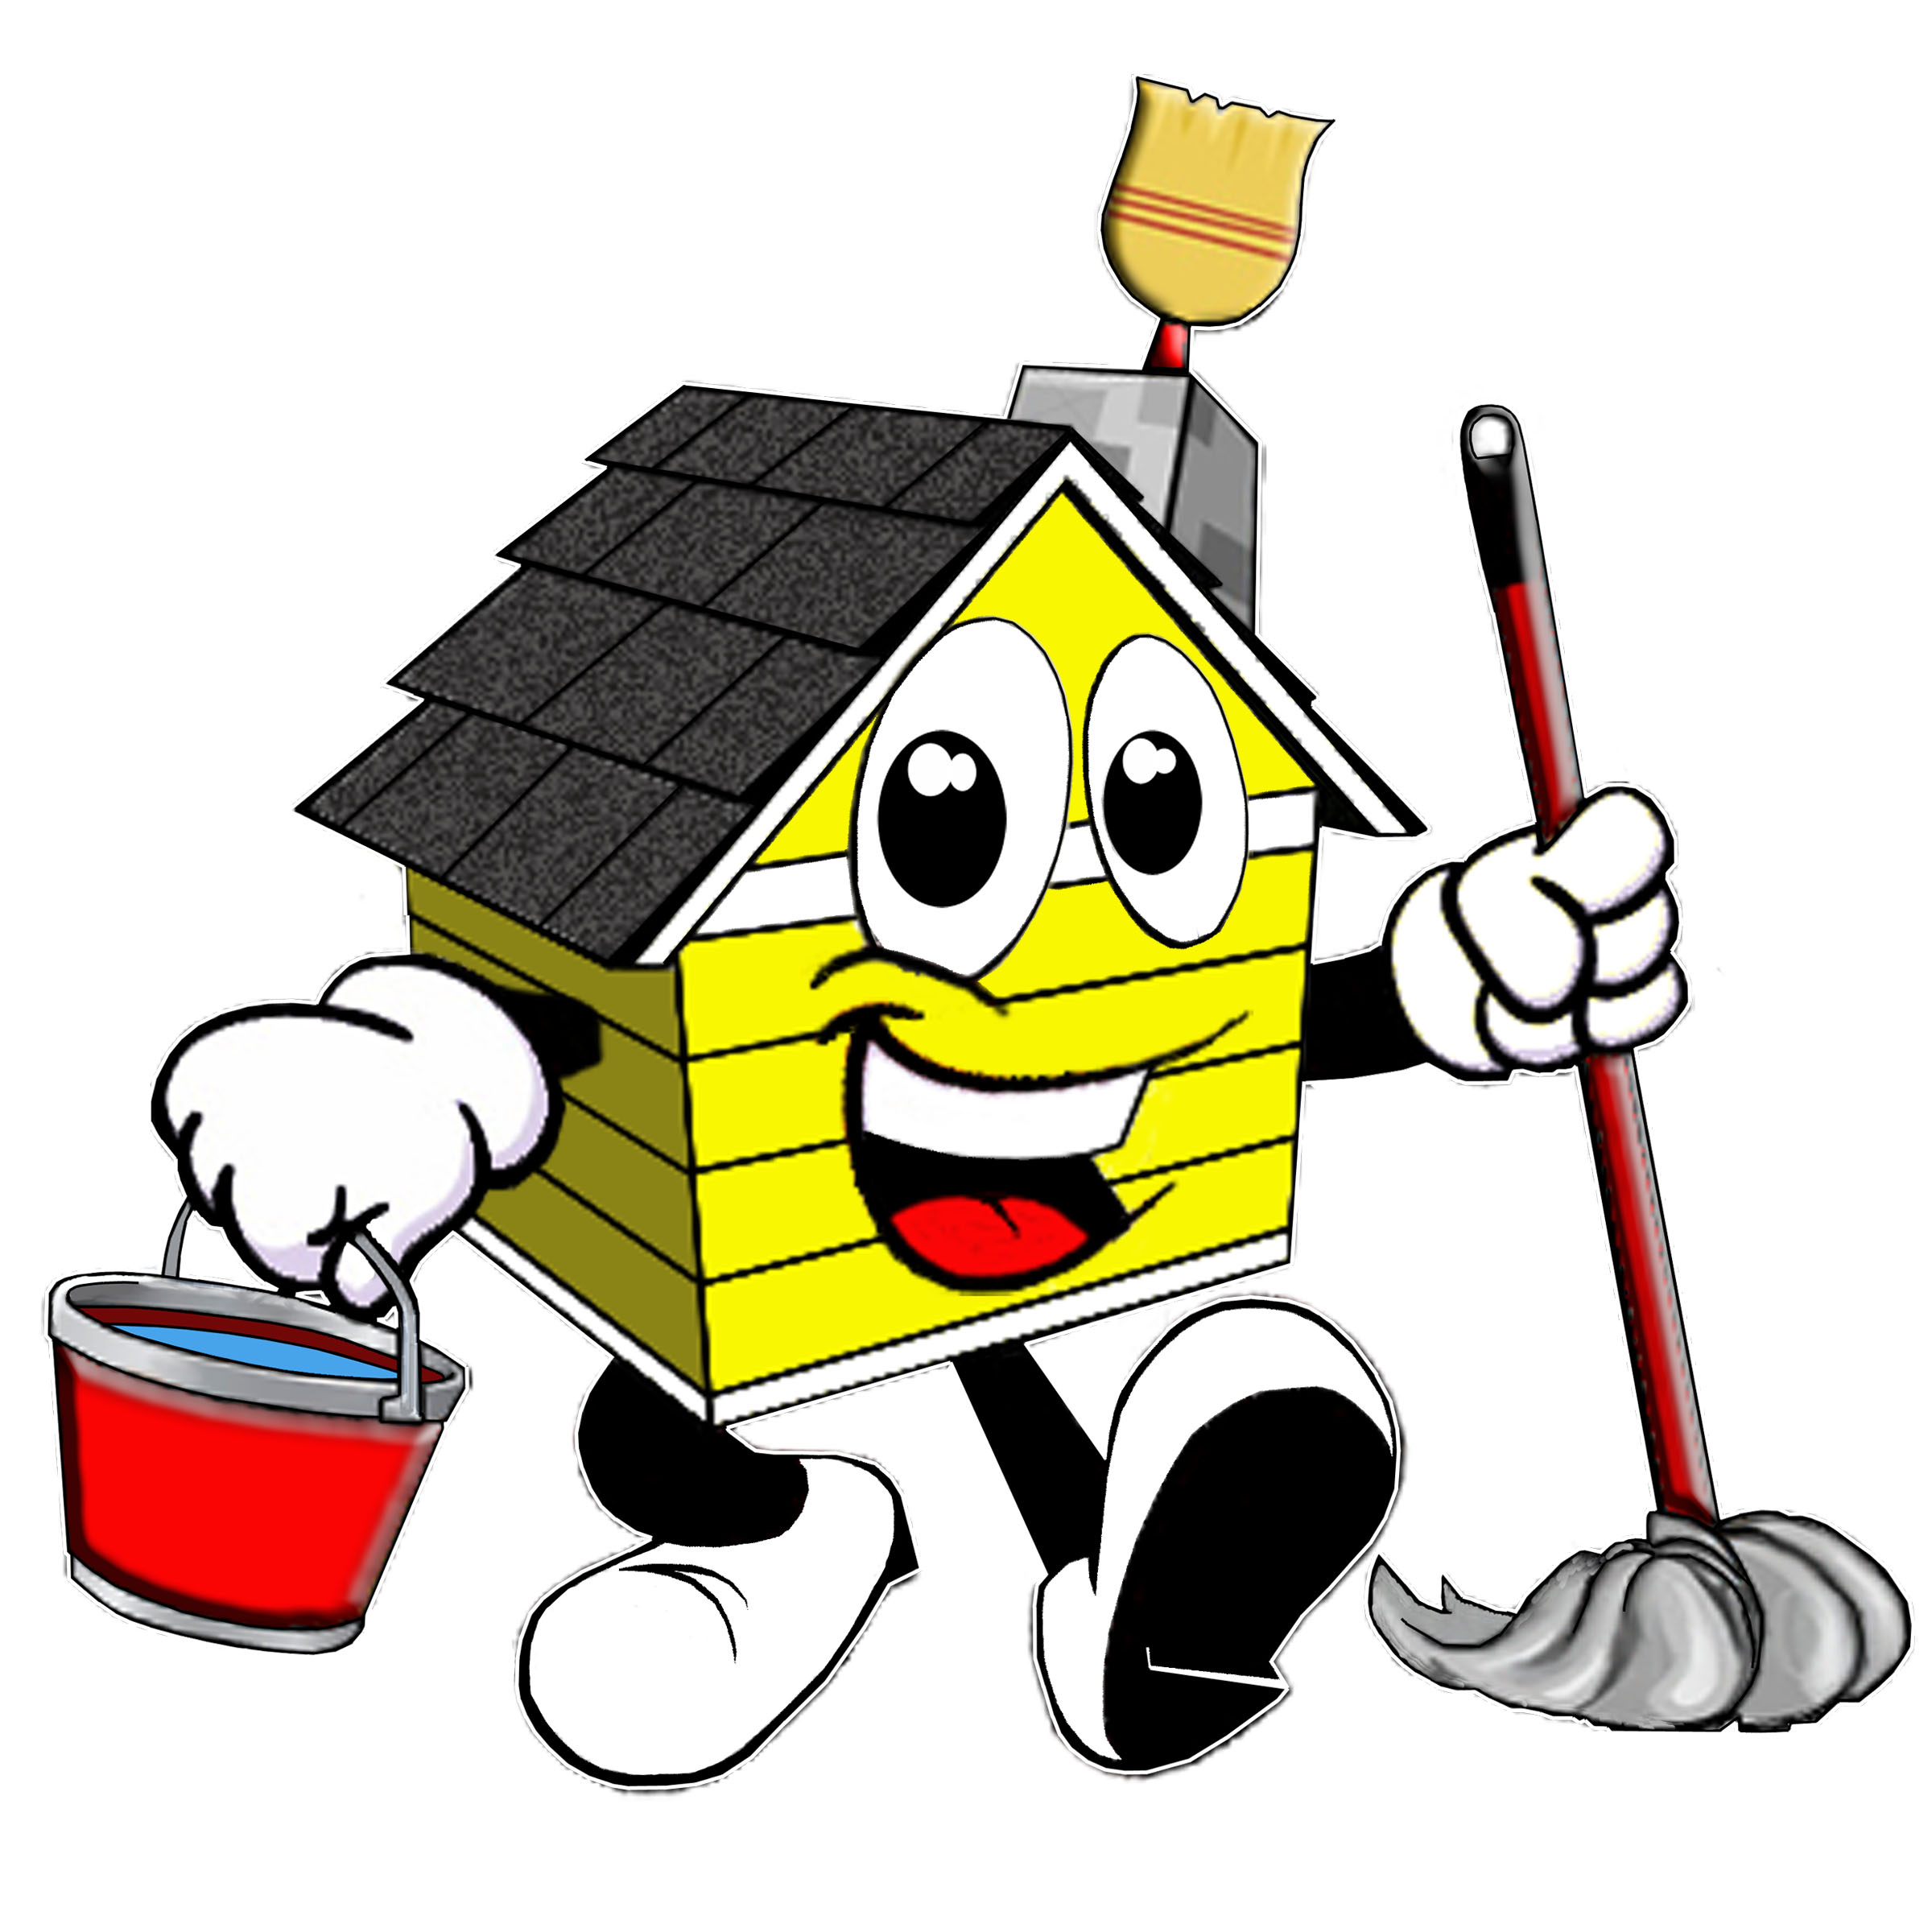 House Cleaning: House Cleaning Business Logos